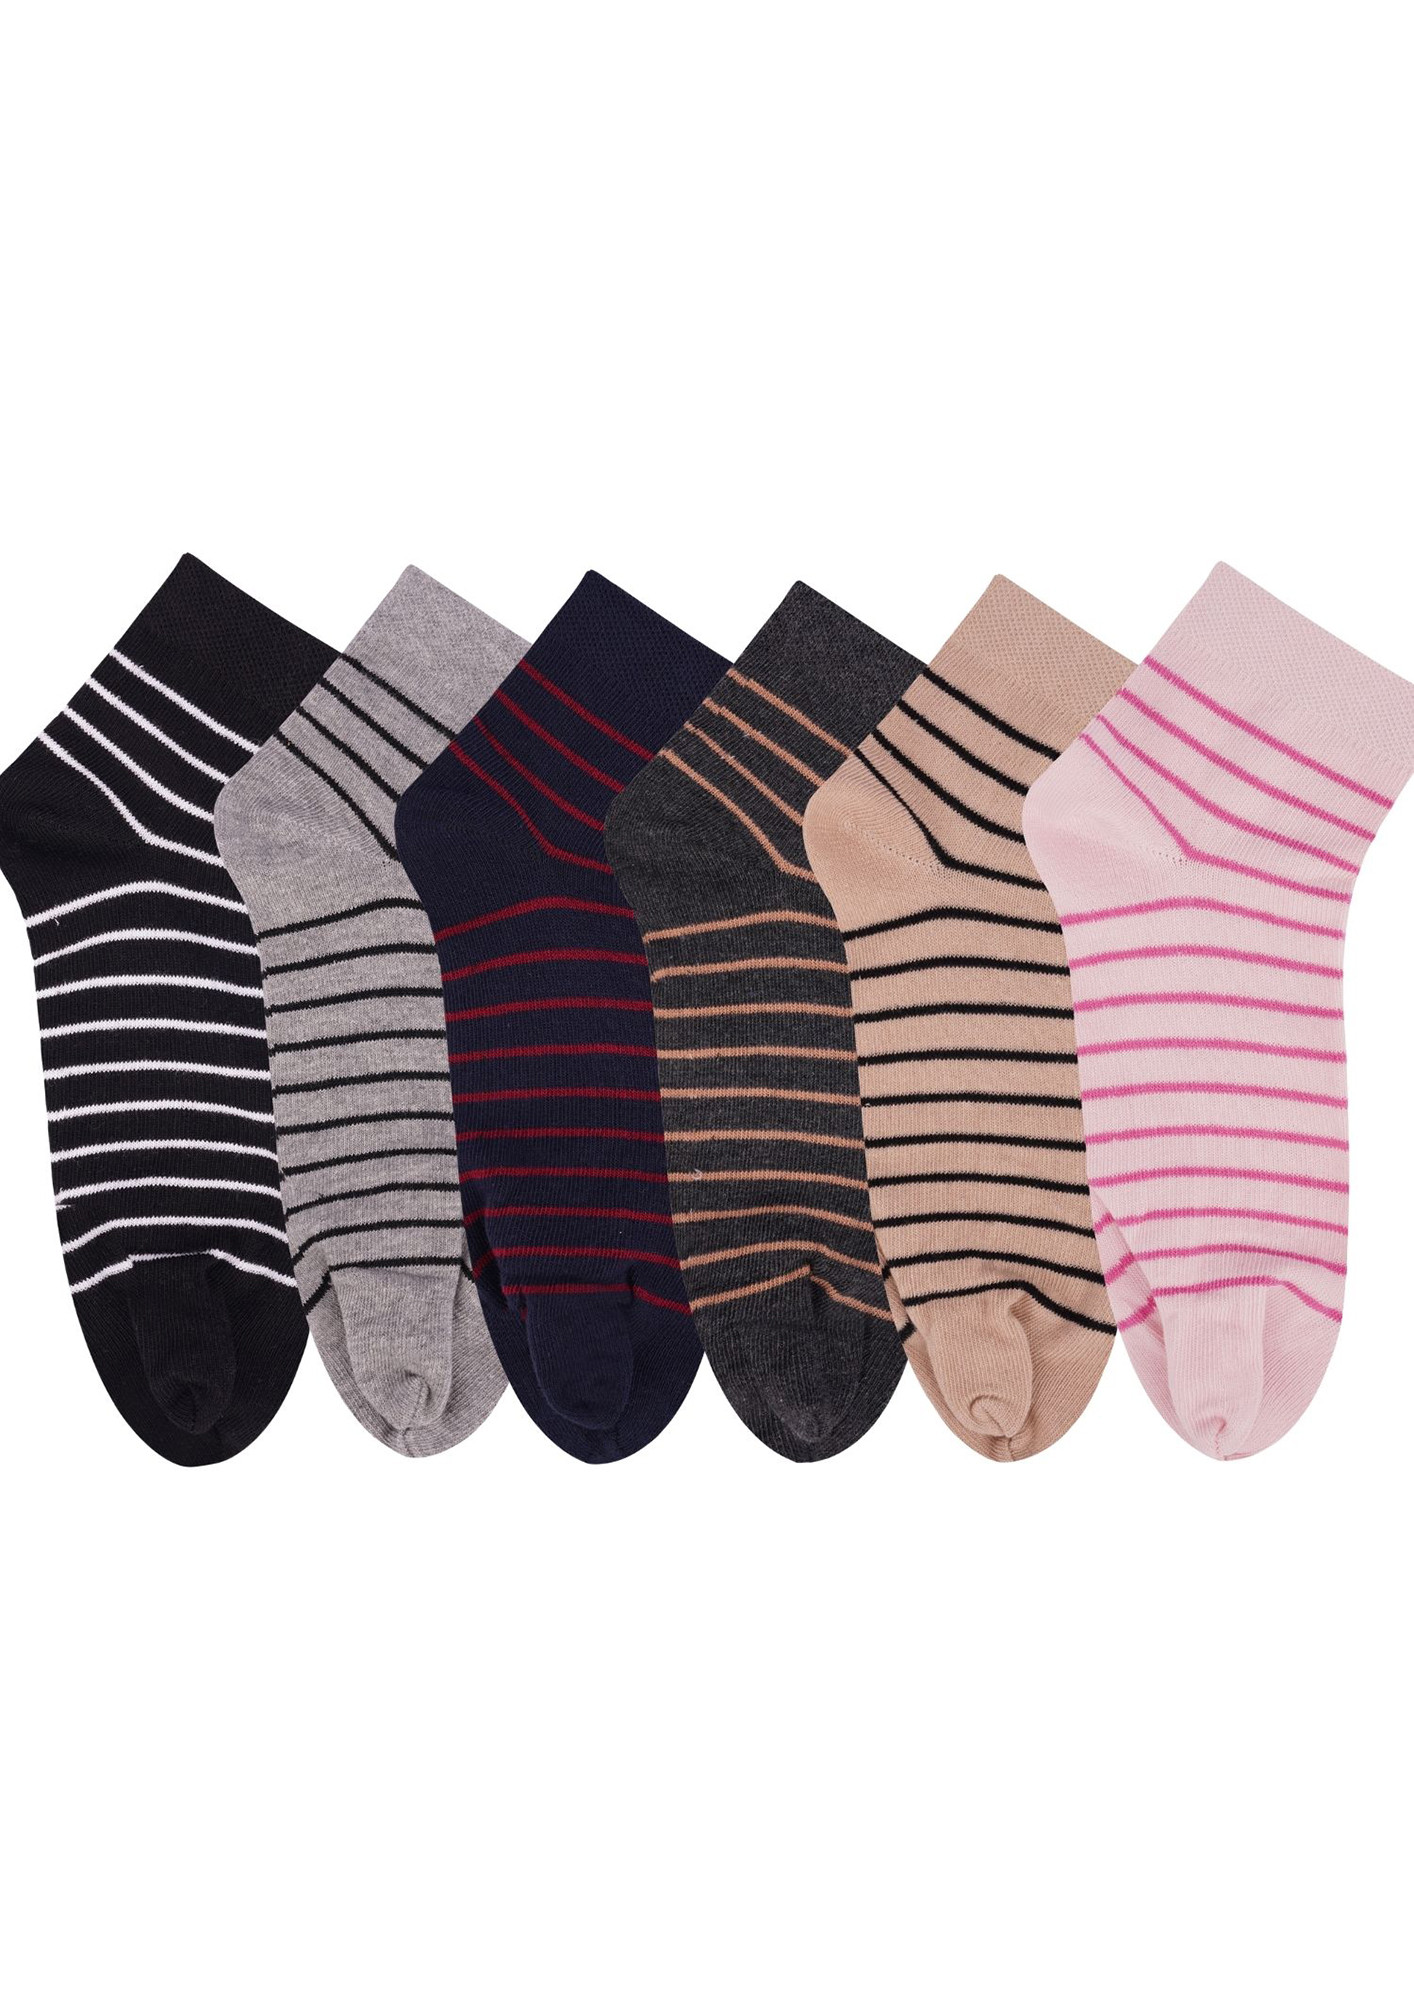 N2S NEXT2SKIN Women's Cotton Ankle Length Thumb Striped Pattern Socks - Pack of 6 Pairs (Multicolor)